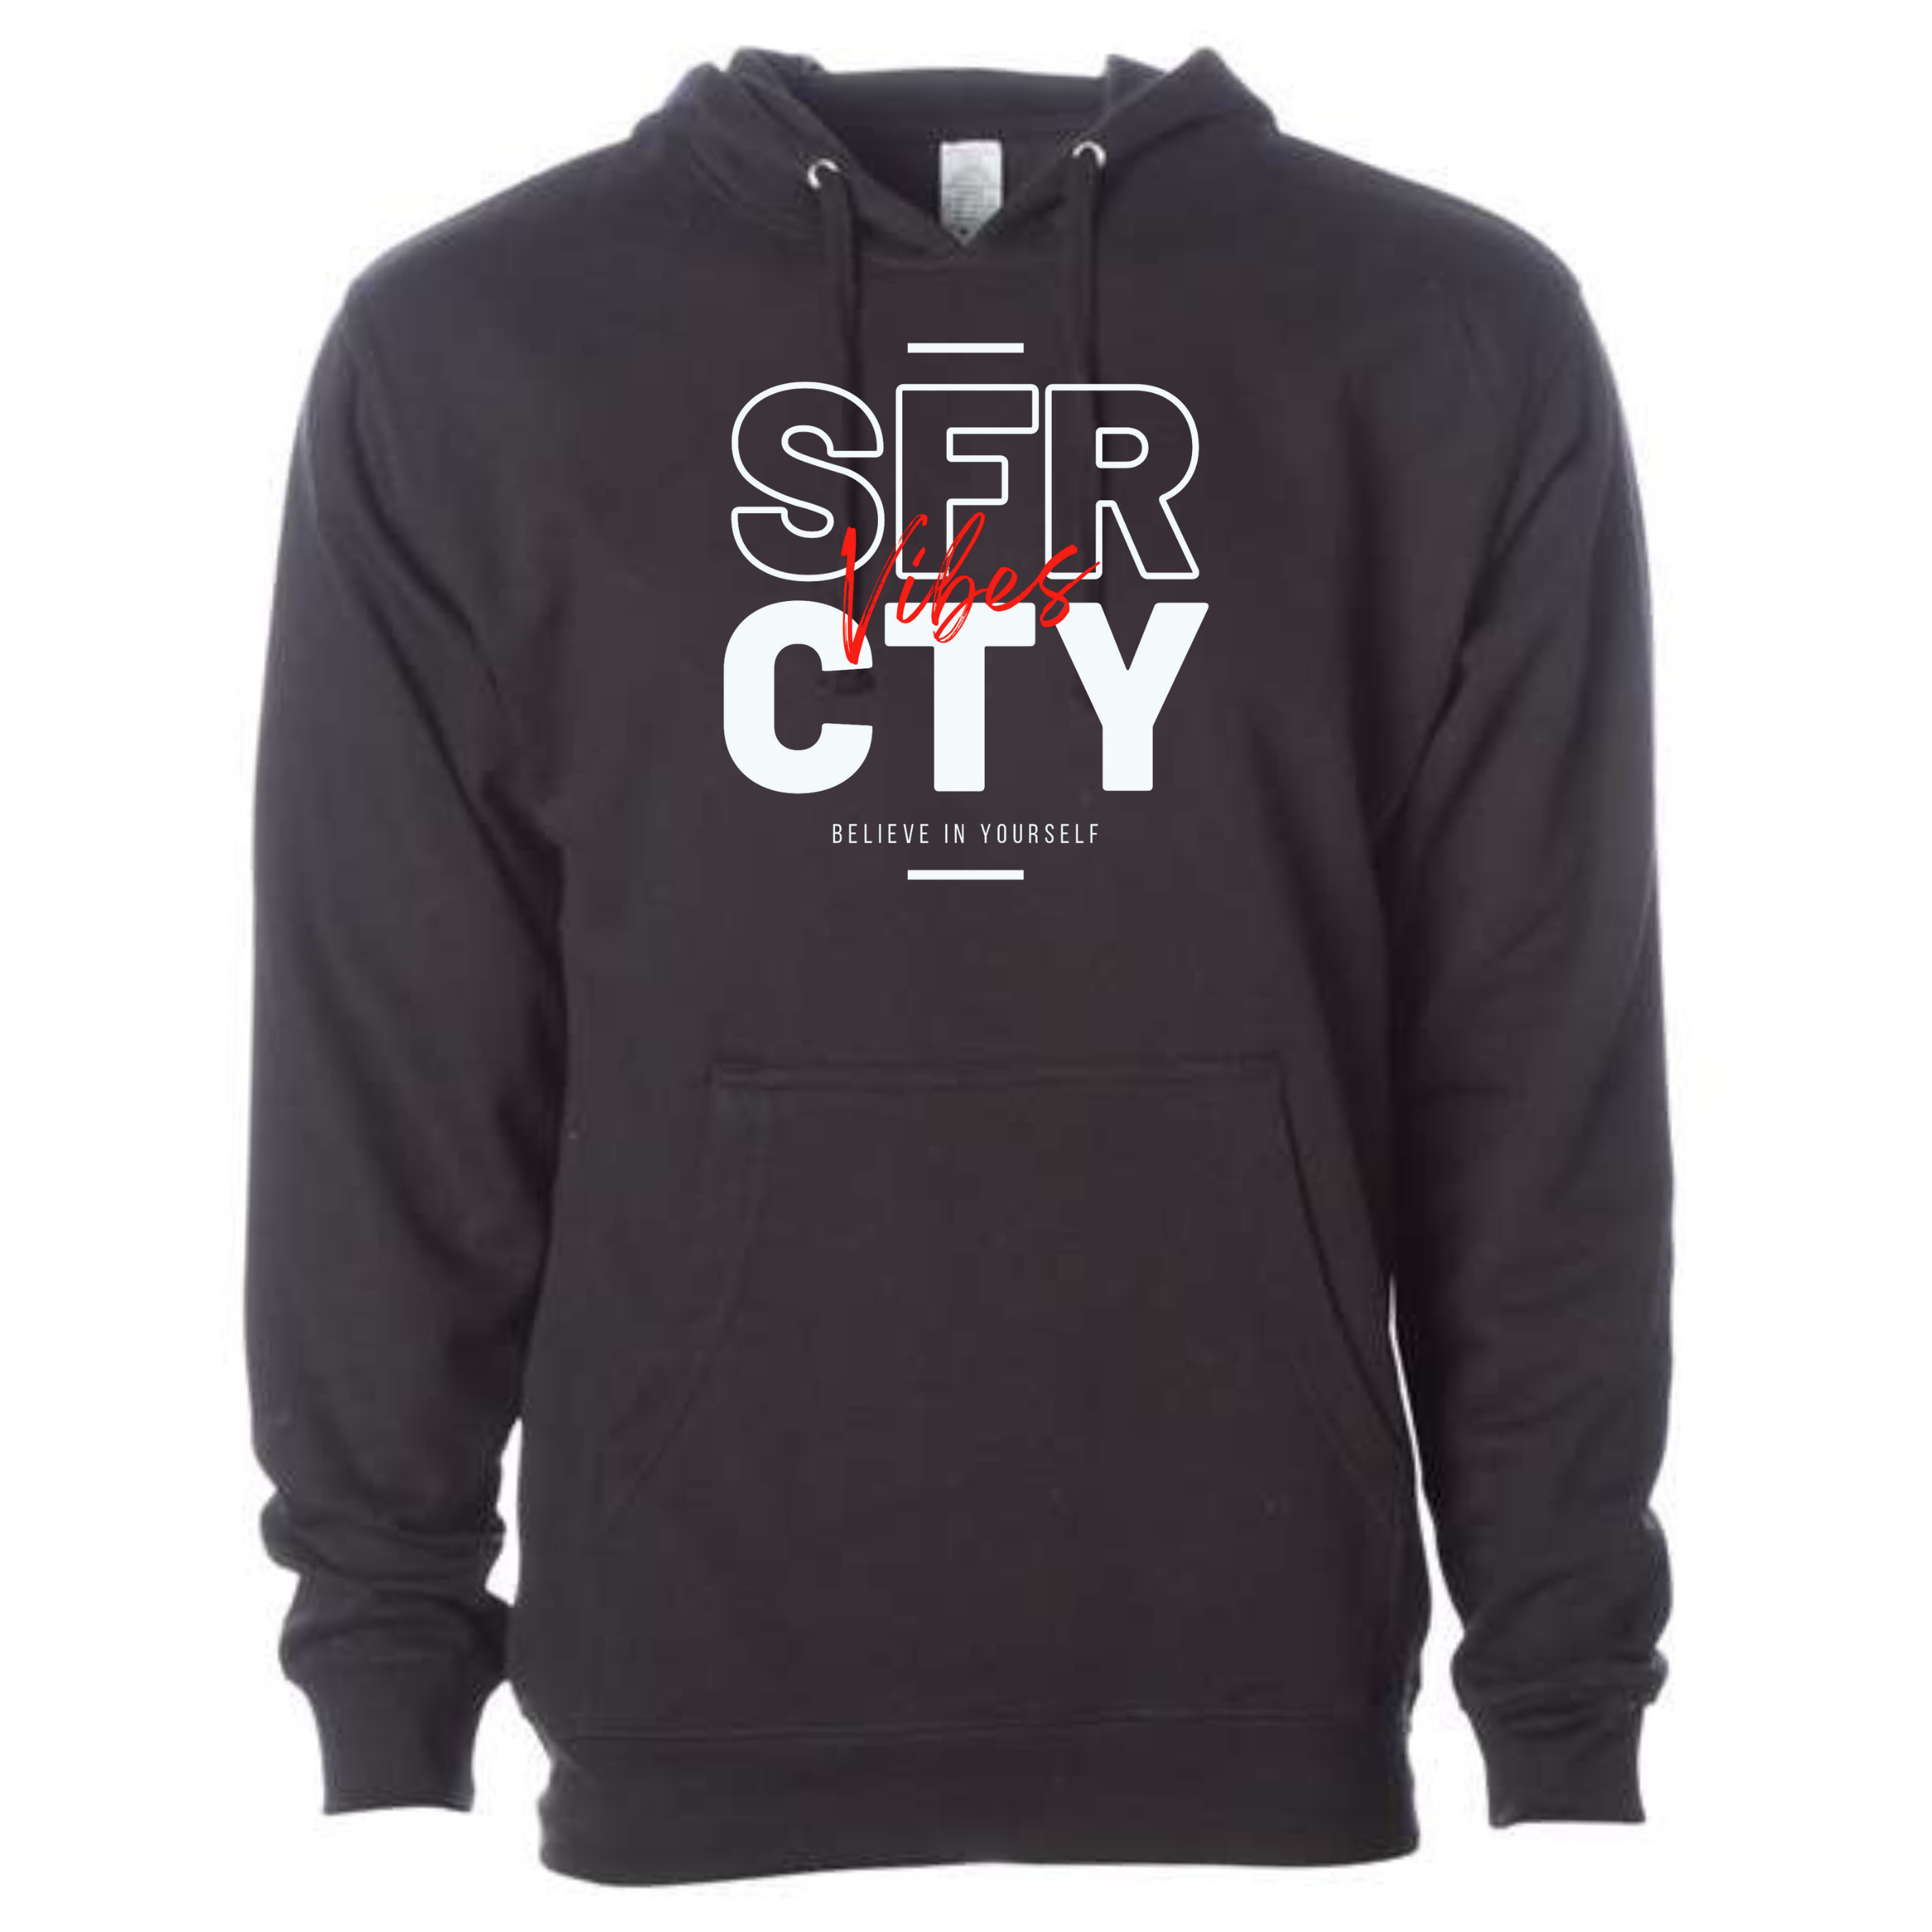 Suffer City Vibes "Warmer" Options